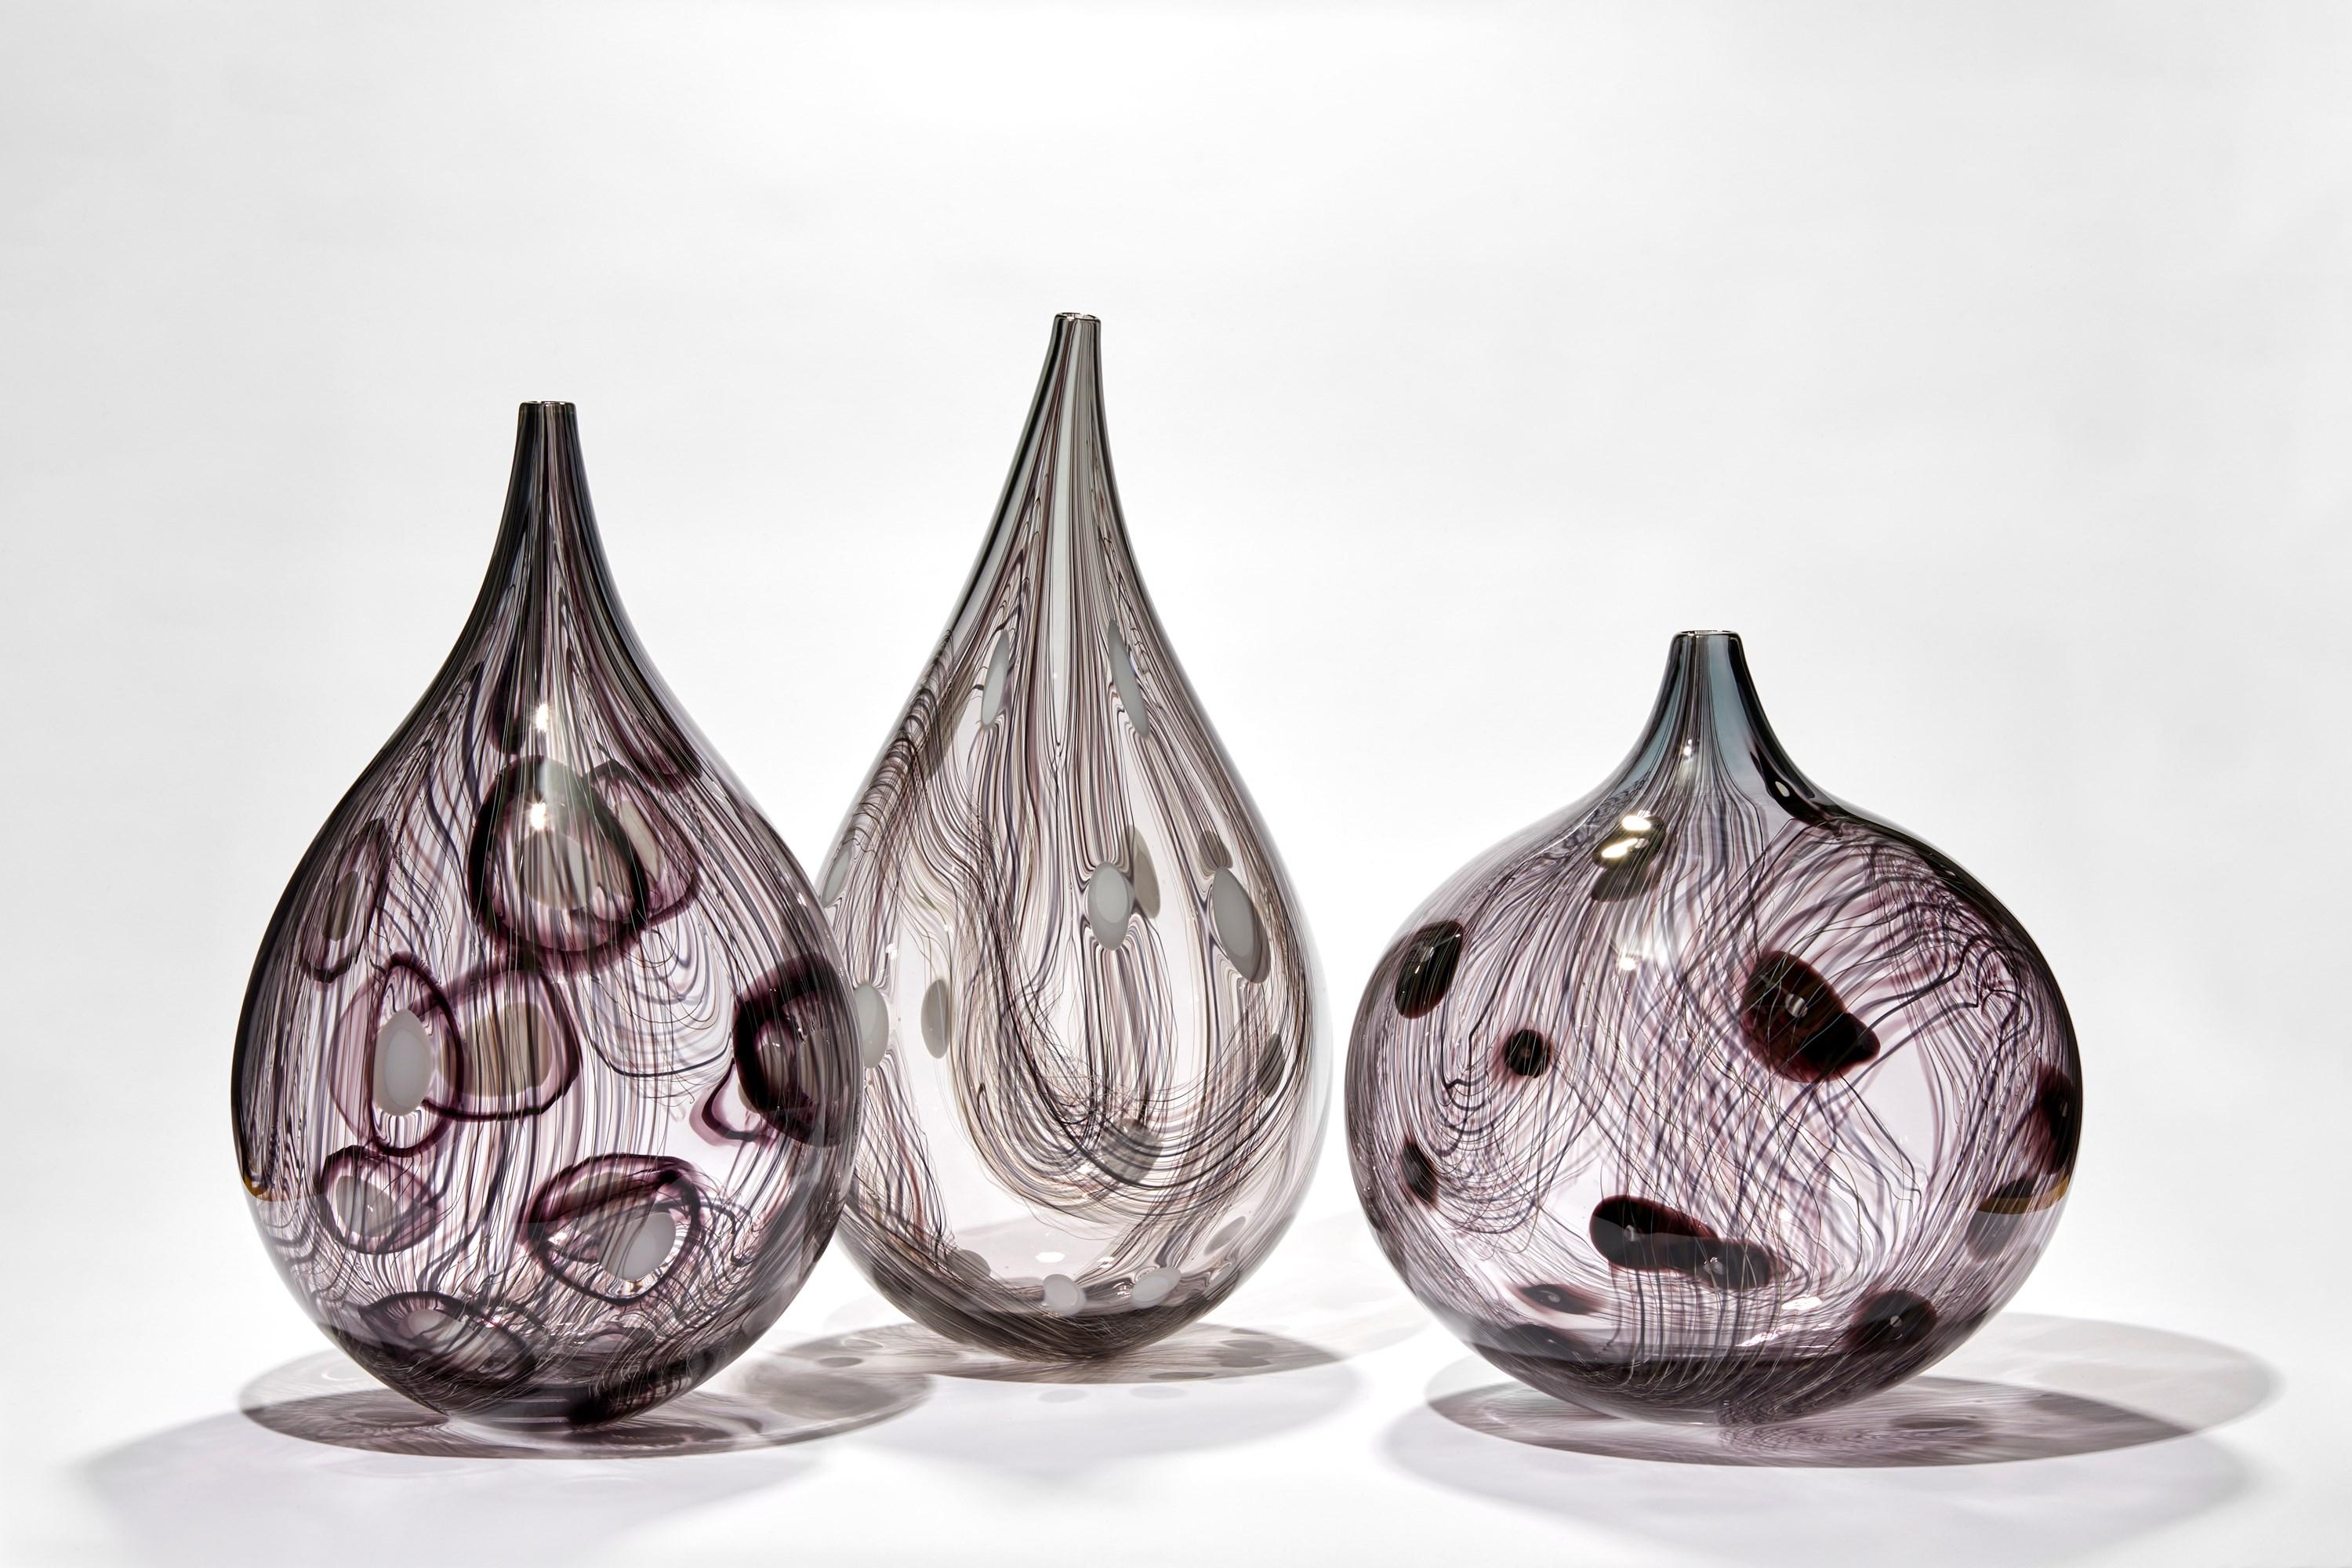 Hand-Crafted Rings iv, a Black / Aubergine & Clear Sculptural Glass Vessel by Ann Wåhlström For Sale